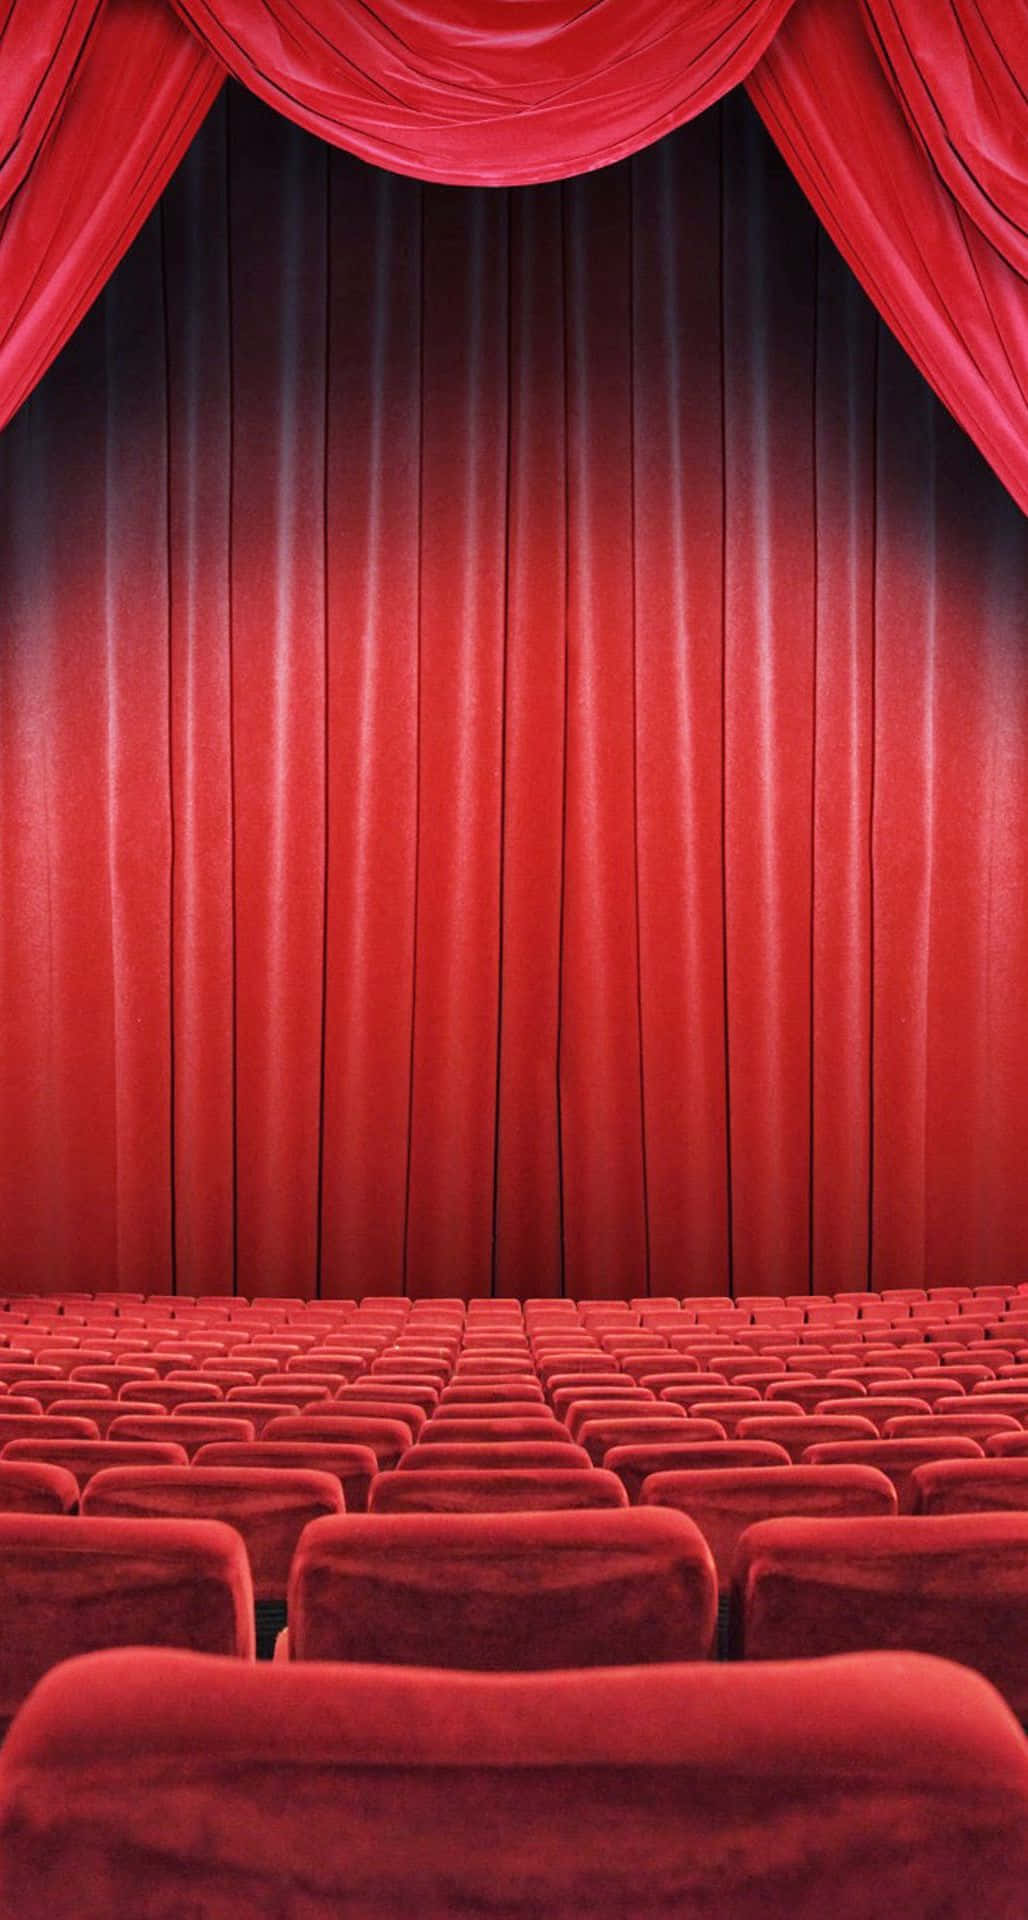 Theater With Red Seats And Curtains Wallpaper